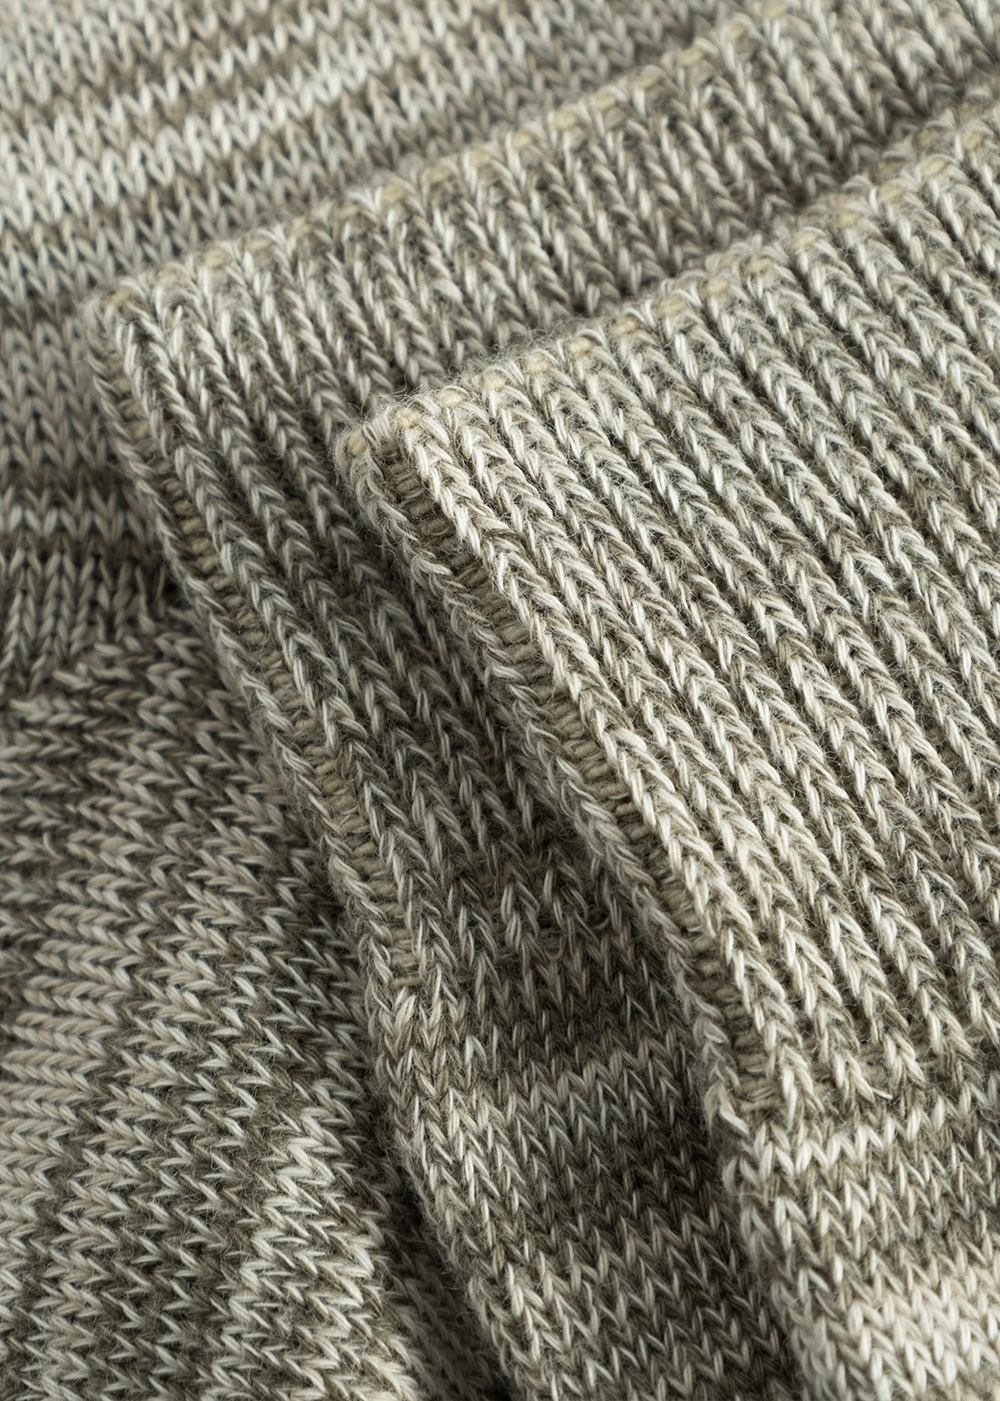 Close up view of the Bjarki Cotton Twist Sock in Sediment Green by Norse Projects, showcasing the detailed stitching in the sock.